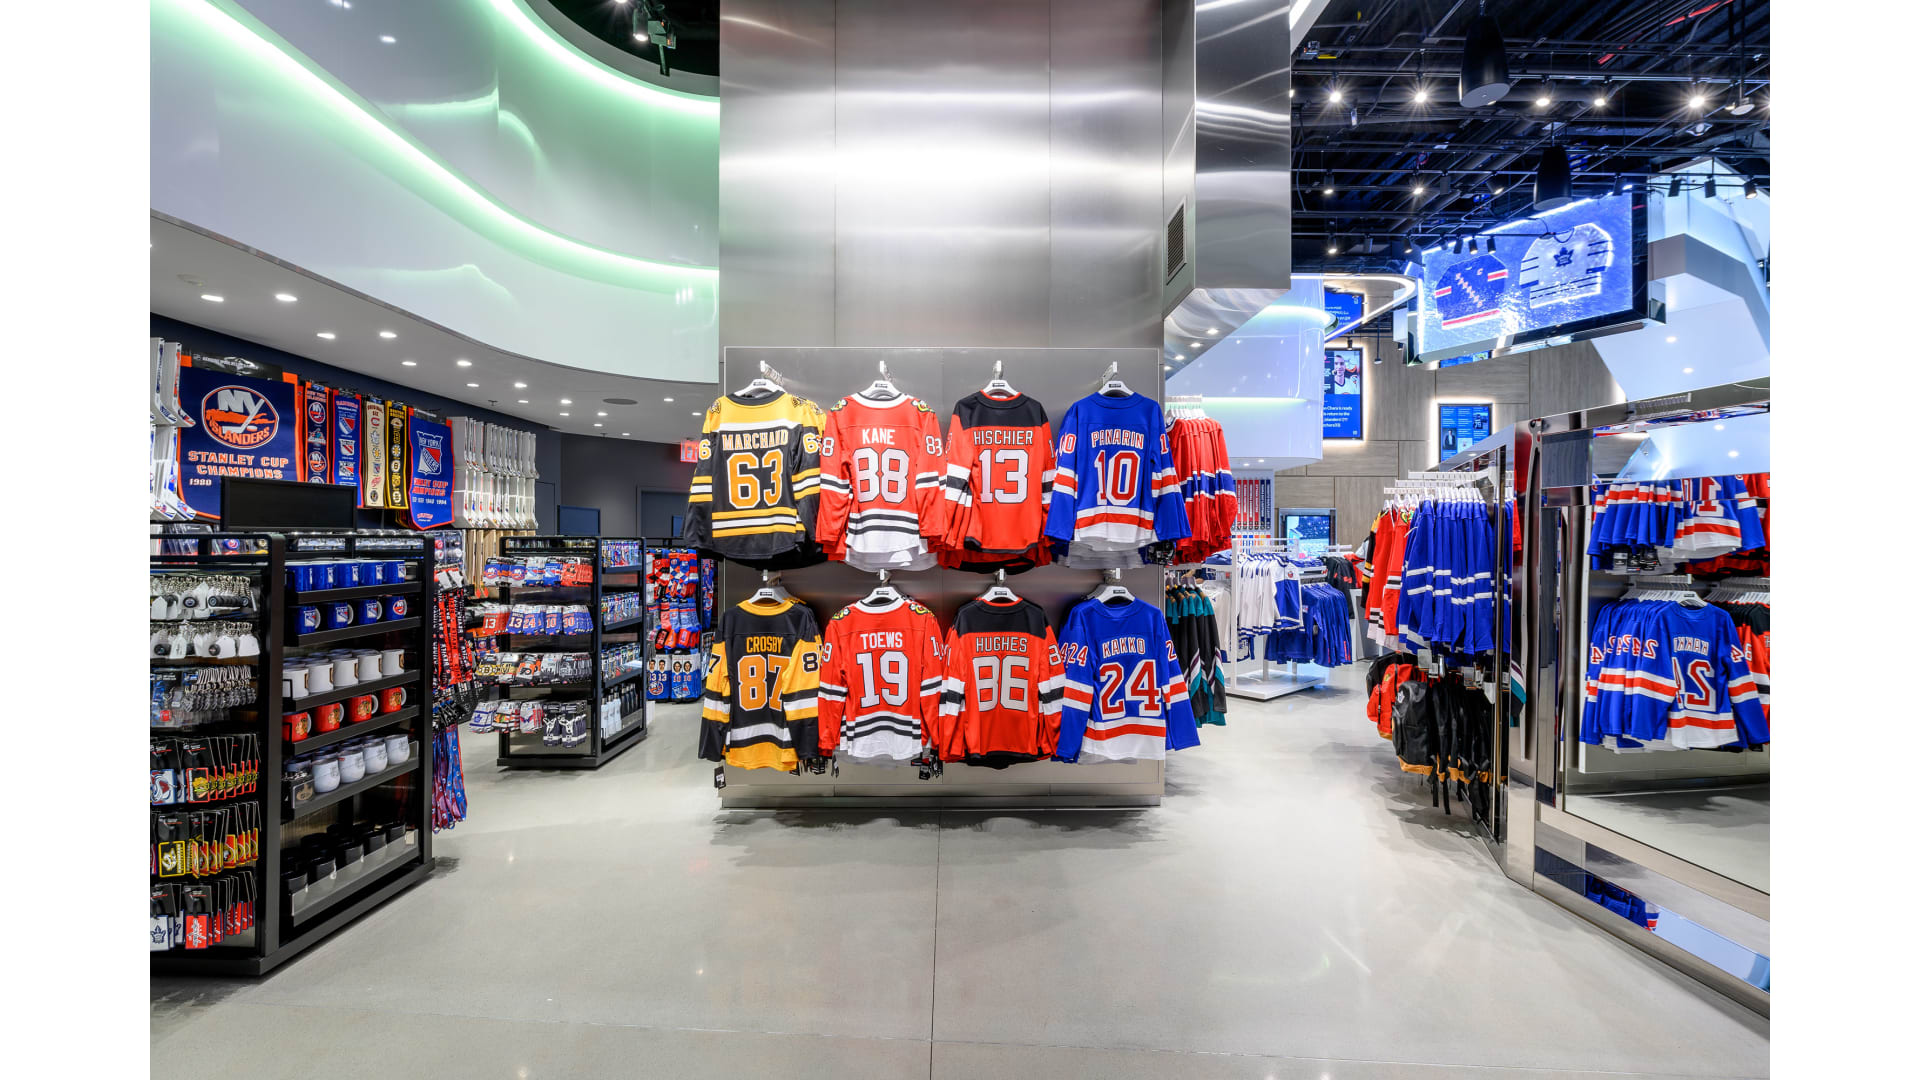 NHL Shop NYC - The all-new NHL Shop flagship store in New York